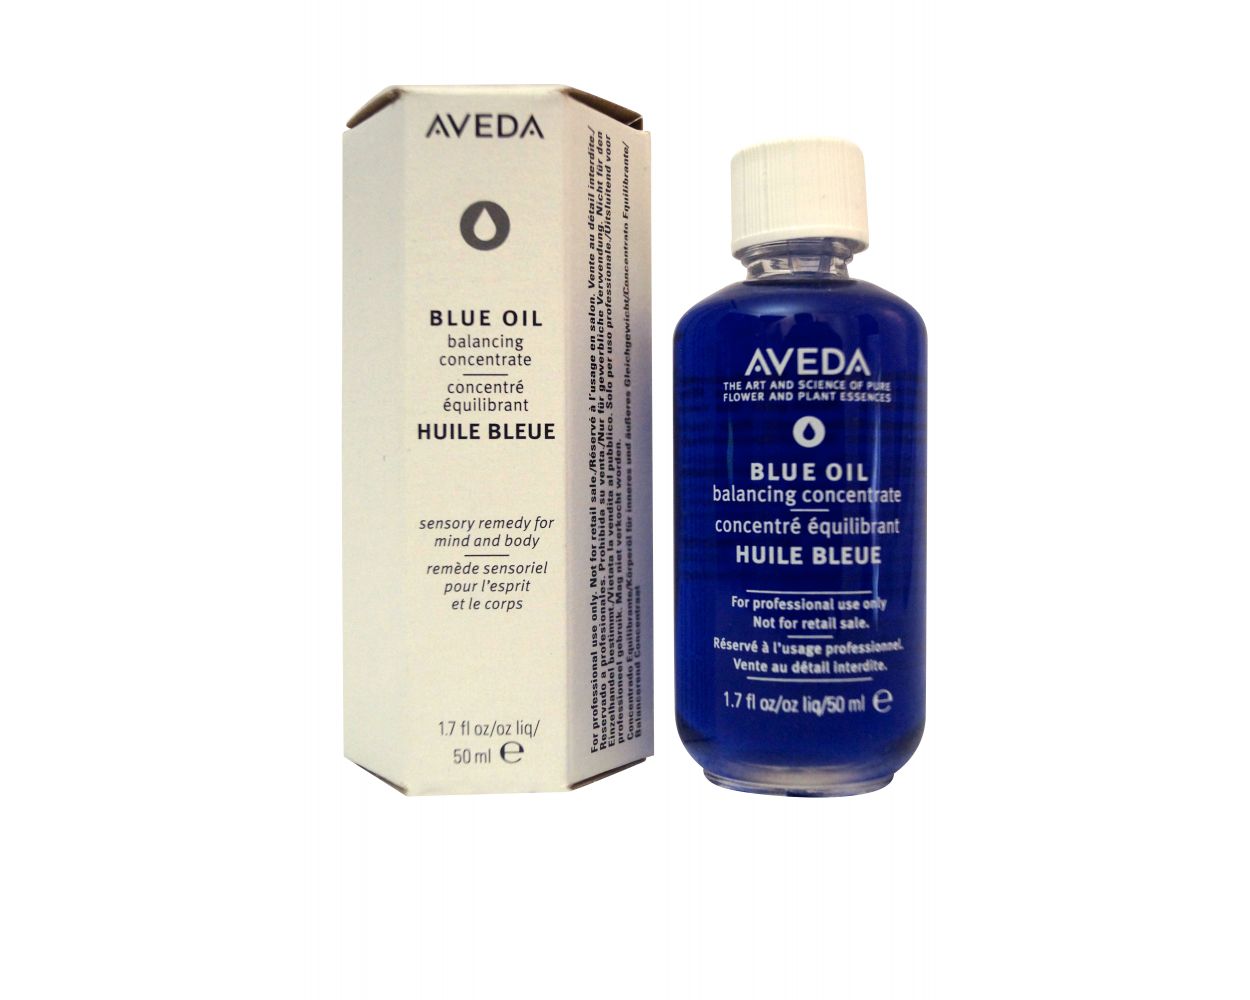 AVEDA Blue Oil Balancing Concentrate - wide 2